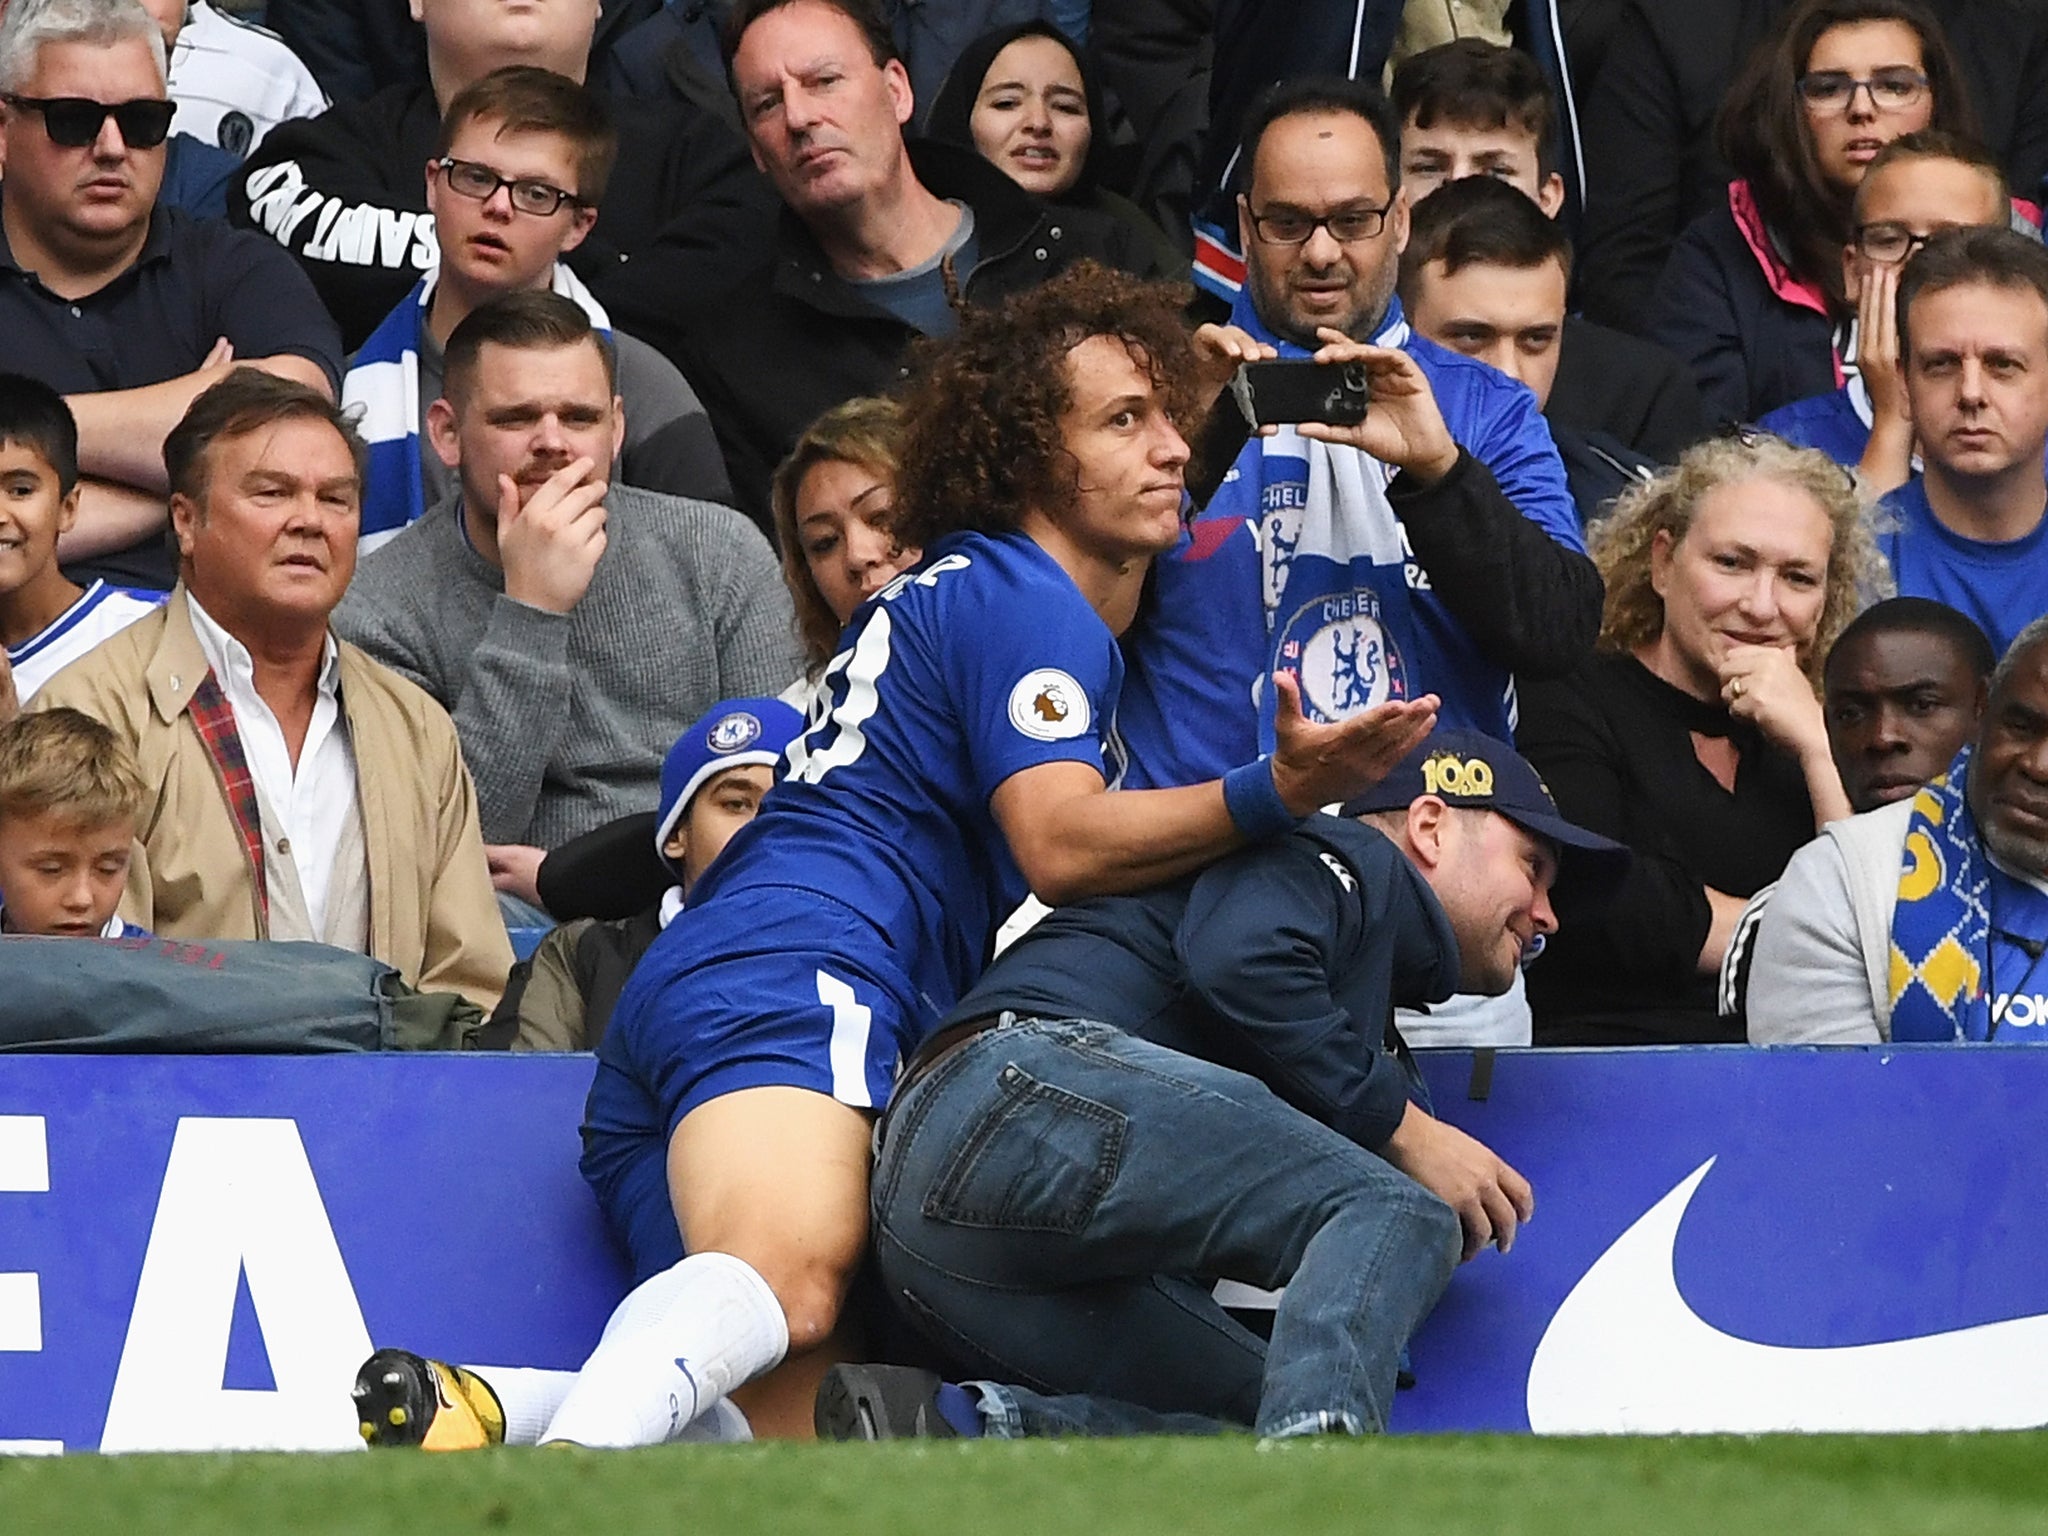 David Luiz broke his wrist after colliding with an advertising hoarding